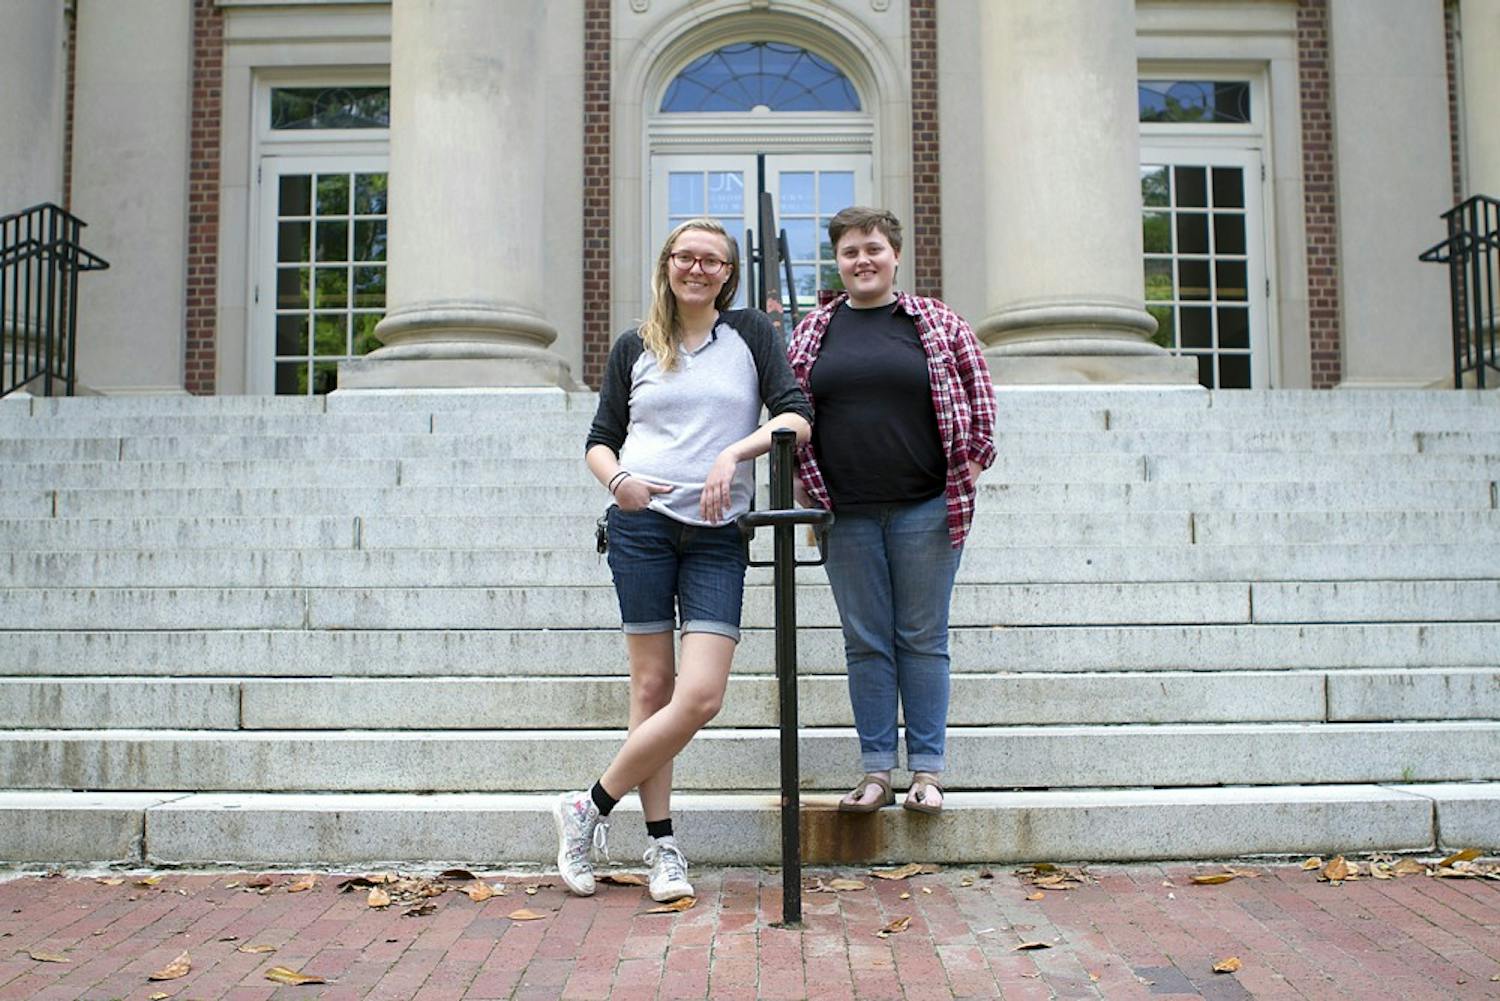 Sophomore political science major Hannah Hodge (right) started dating their partner Jen soon after starting at UNC.